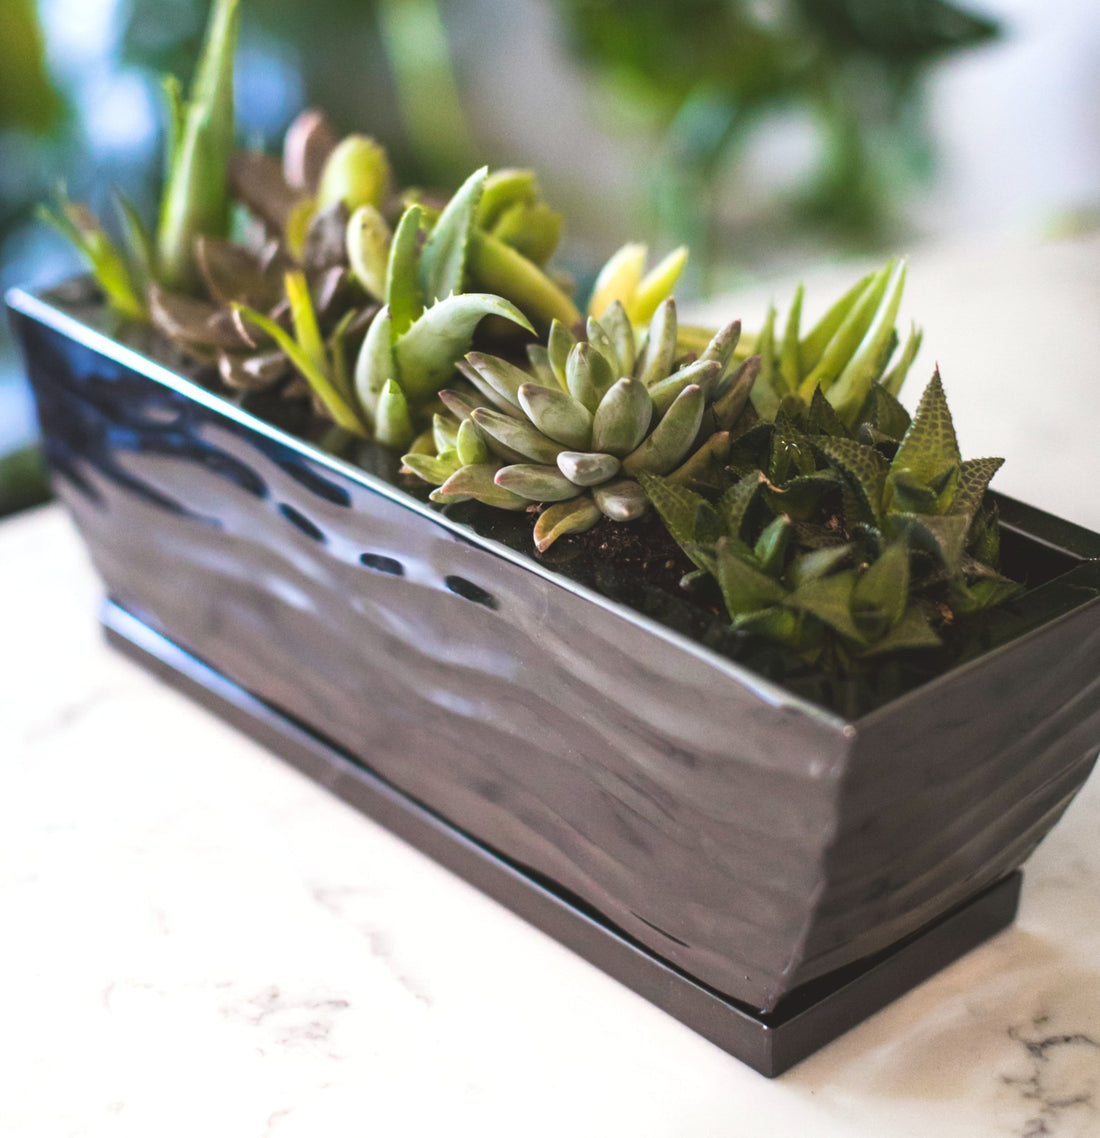 H Potter brand small metal garden planter plant pot container with succulents indoor on table